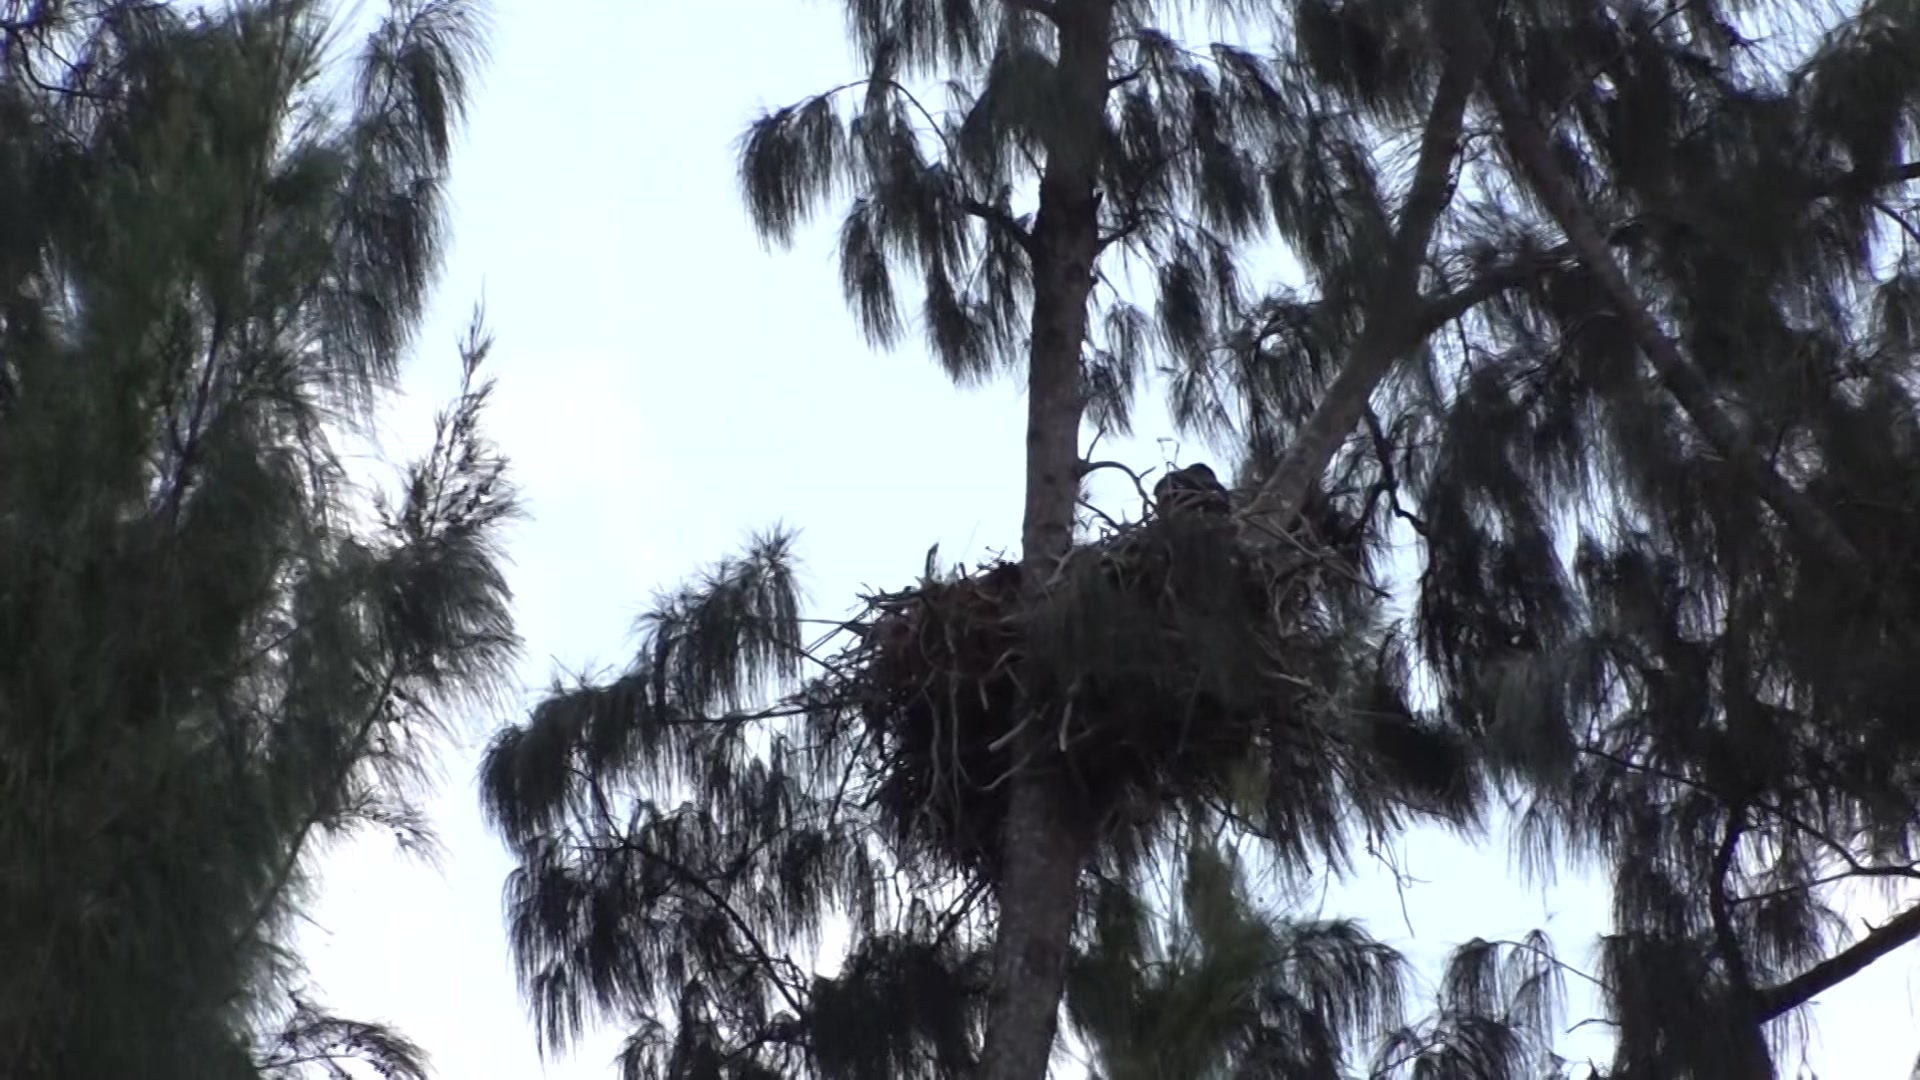 Bird Watchers, Wildlife Enthusiasts Want To Save Pembroke Pines Eagles’ Nesting Land From Developers